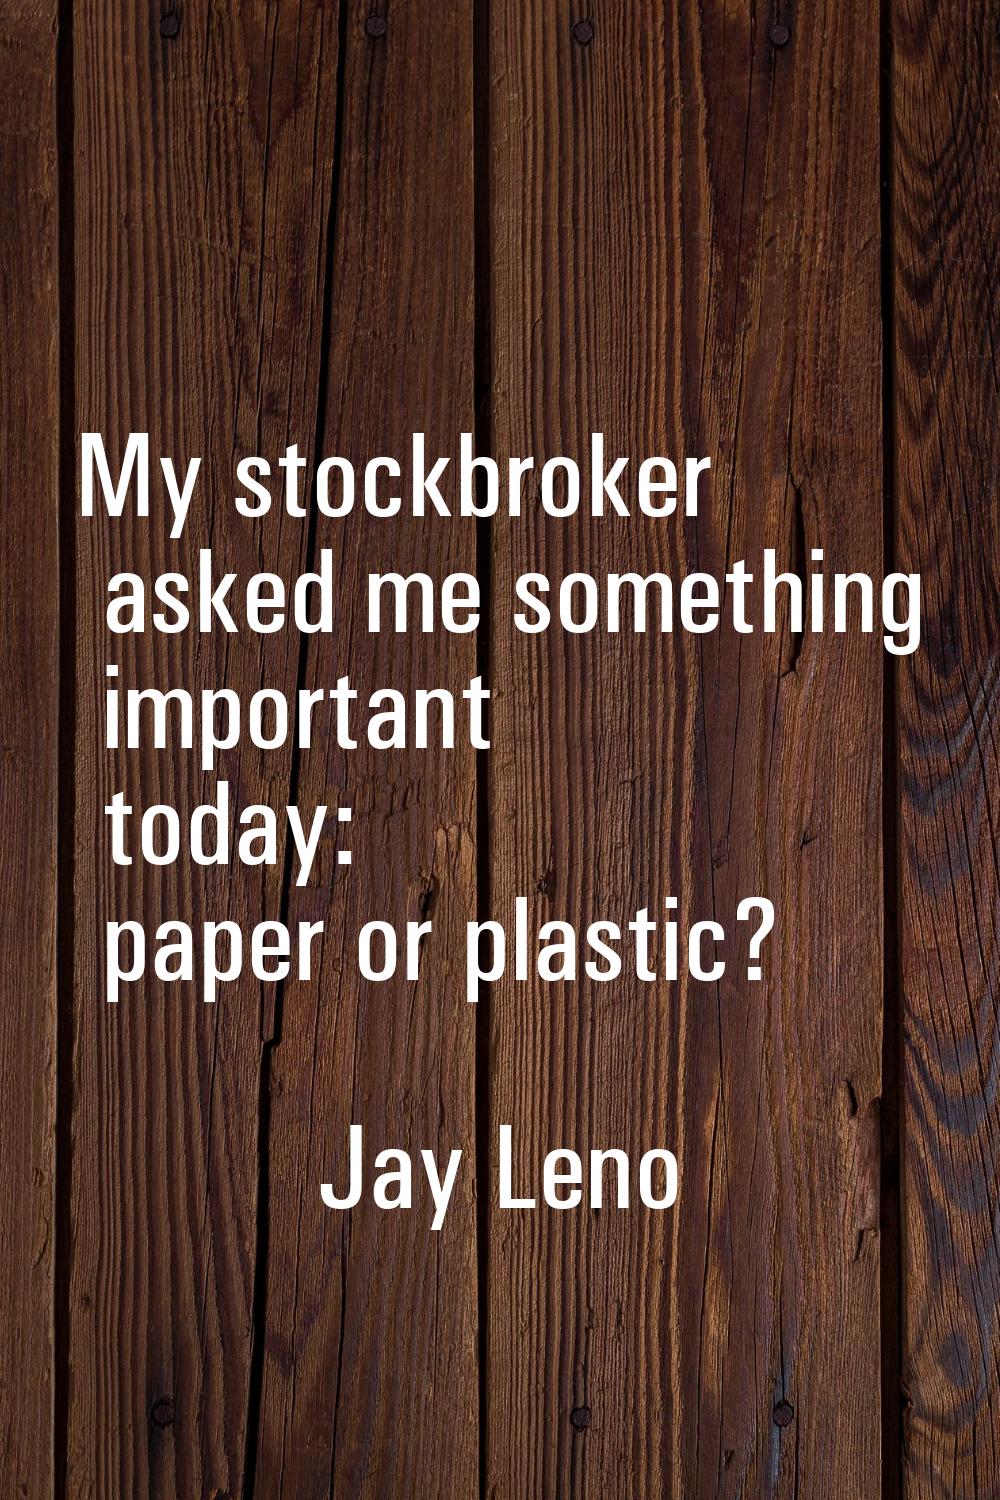 My stockbroker asked me something important today: paper or plastic?